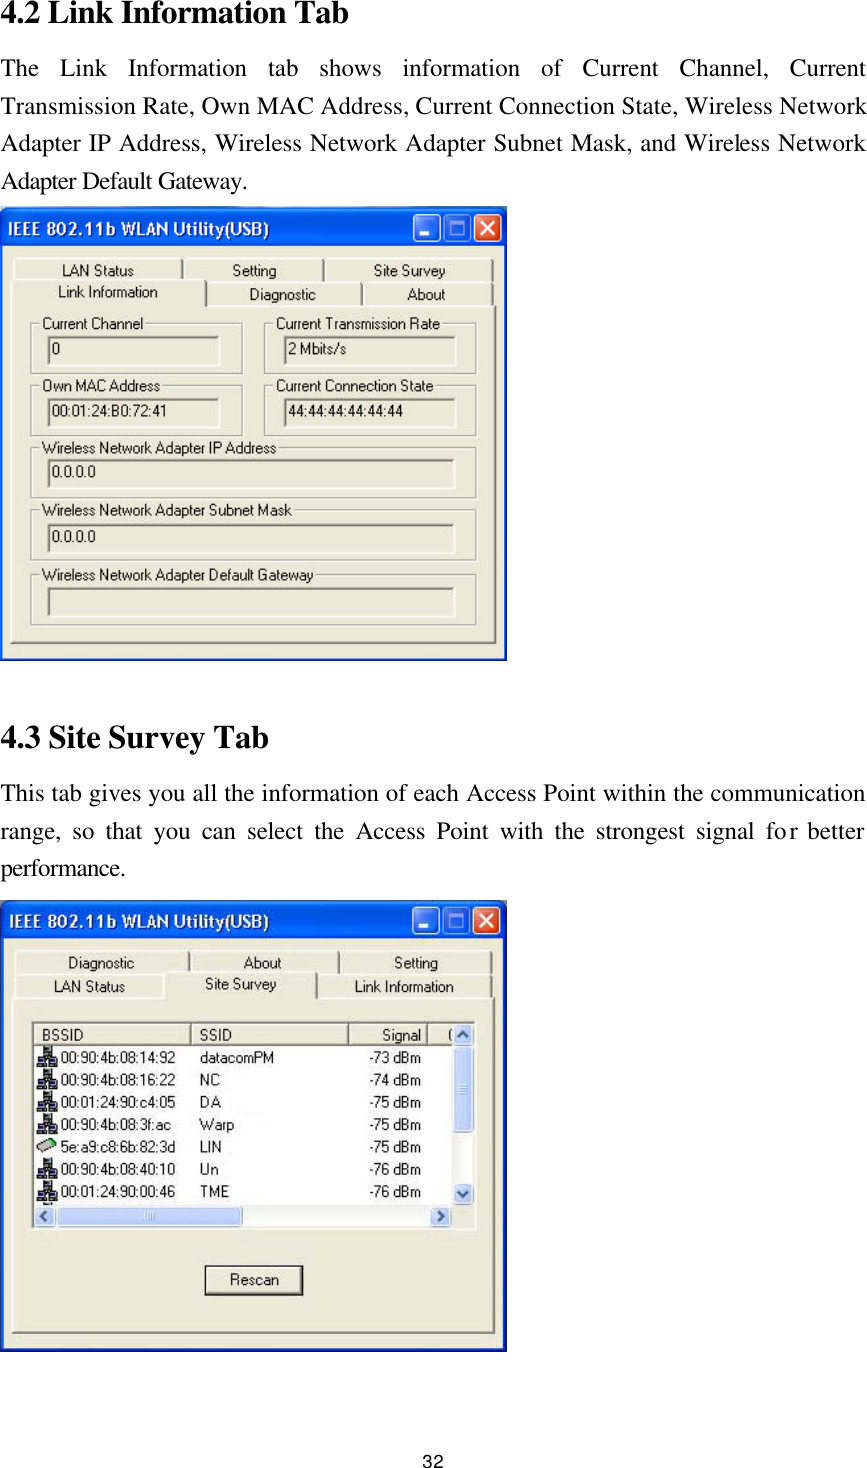  32 4.2 Link Information Tab The Link Information tab shows information of Current Channel, Current Transmission Rate, Own MAC Address, Current Connection State, Wireless Network Adapter IP Address, Wireless Network Adapter Subnet Mask, and Wireless Network Adapter Default Gateway.           4.3 Site Survey Tab This tab gives you all the information of each Access Point within the communication range, so that you can select the Access Point with the strongest signal for better performance.  